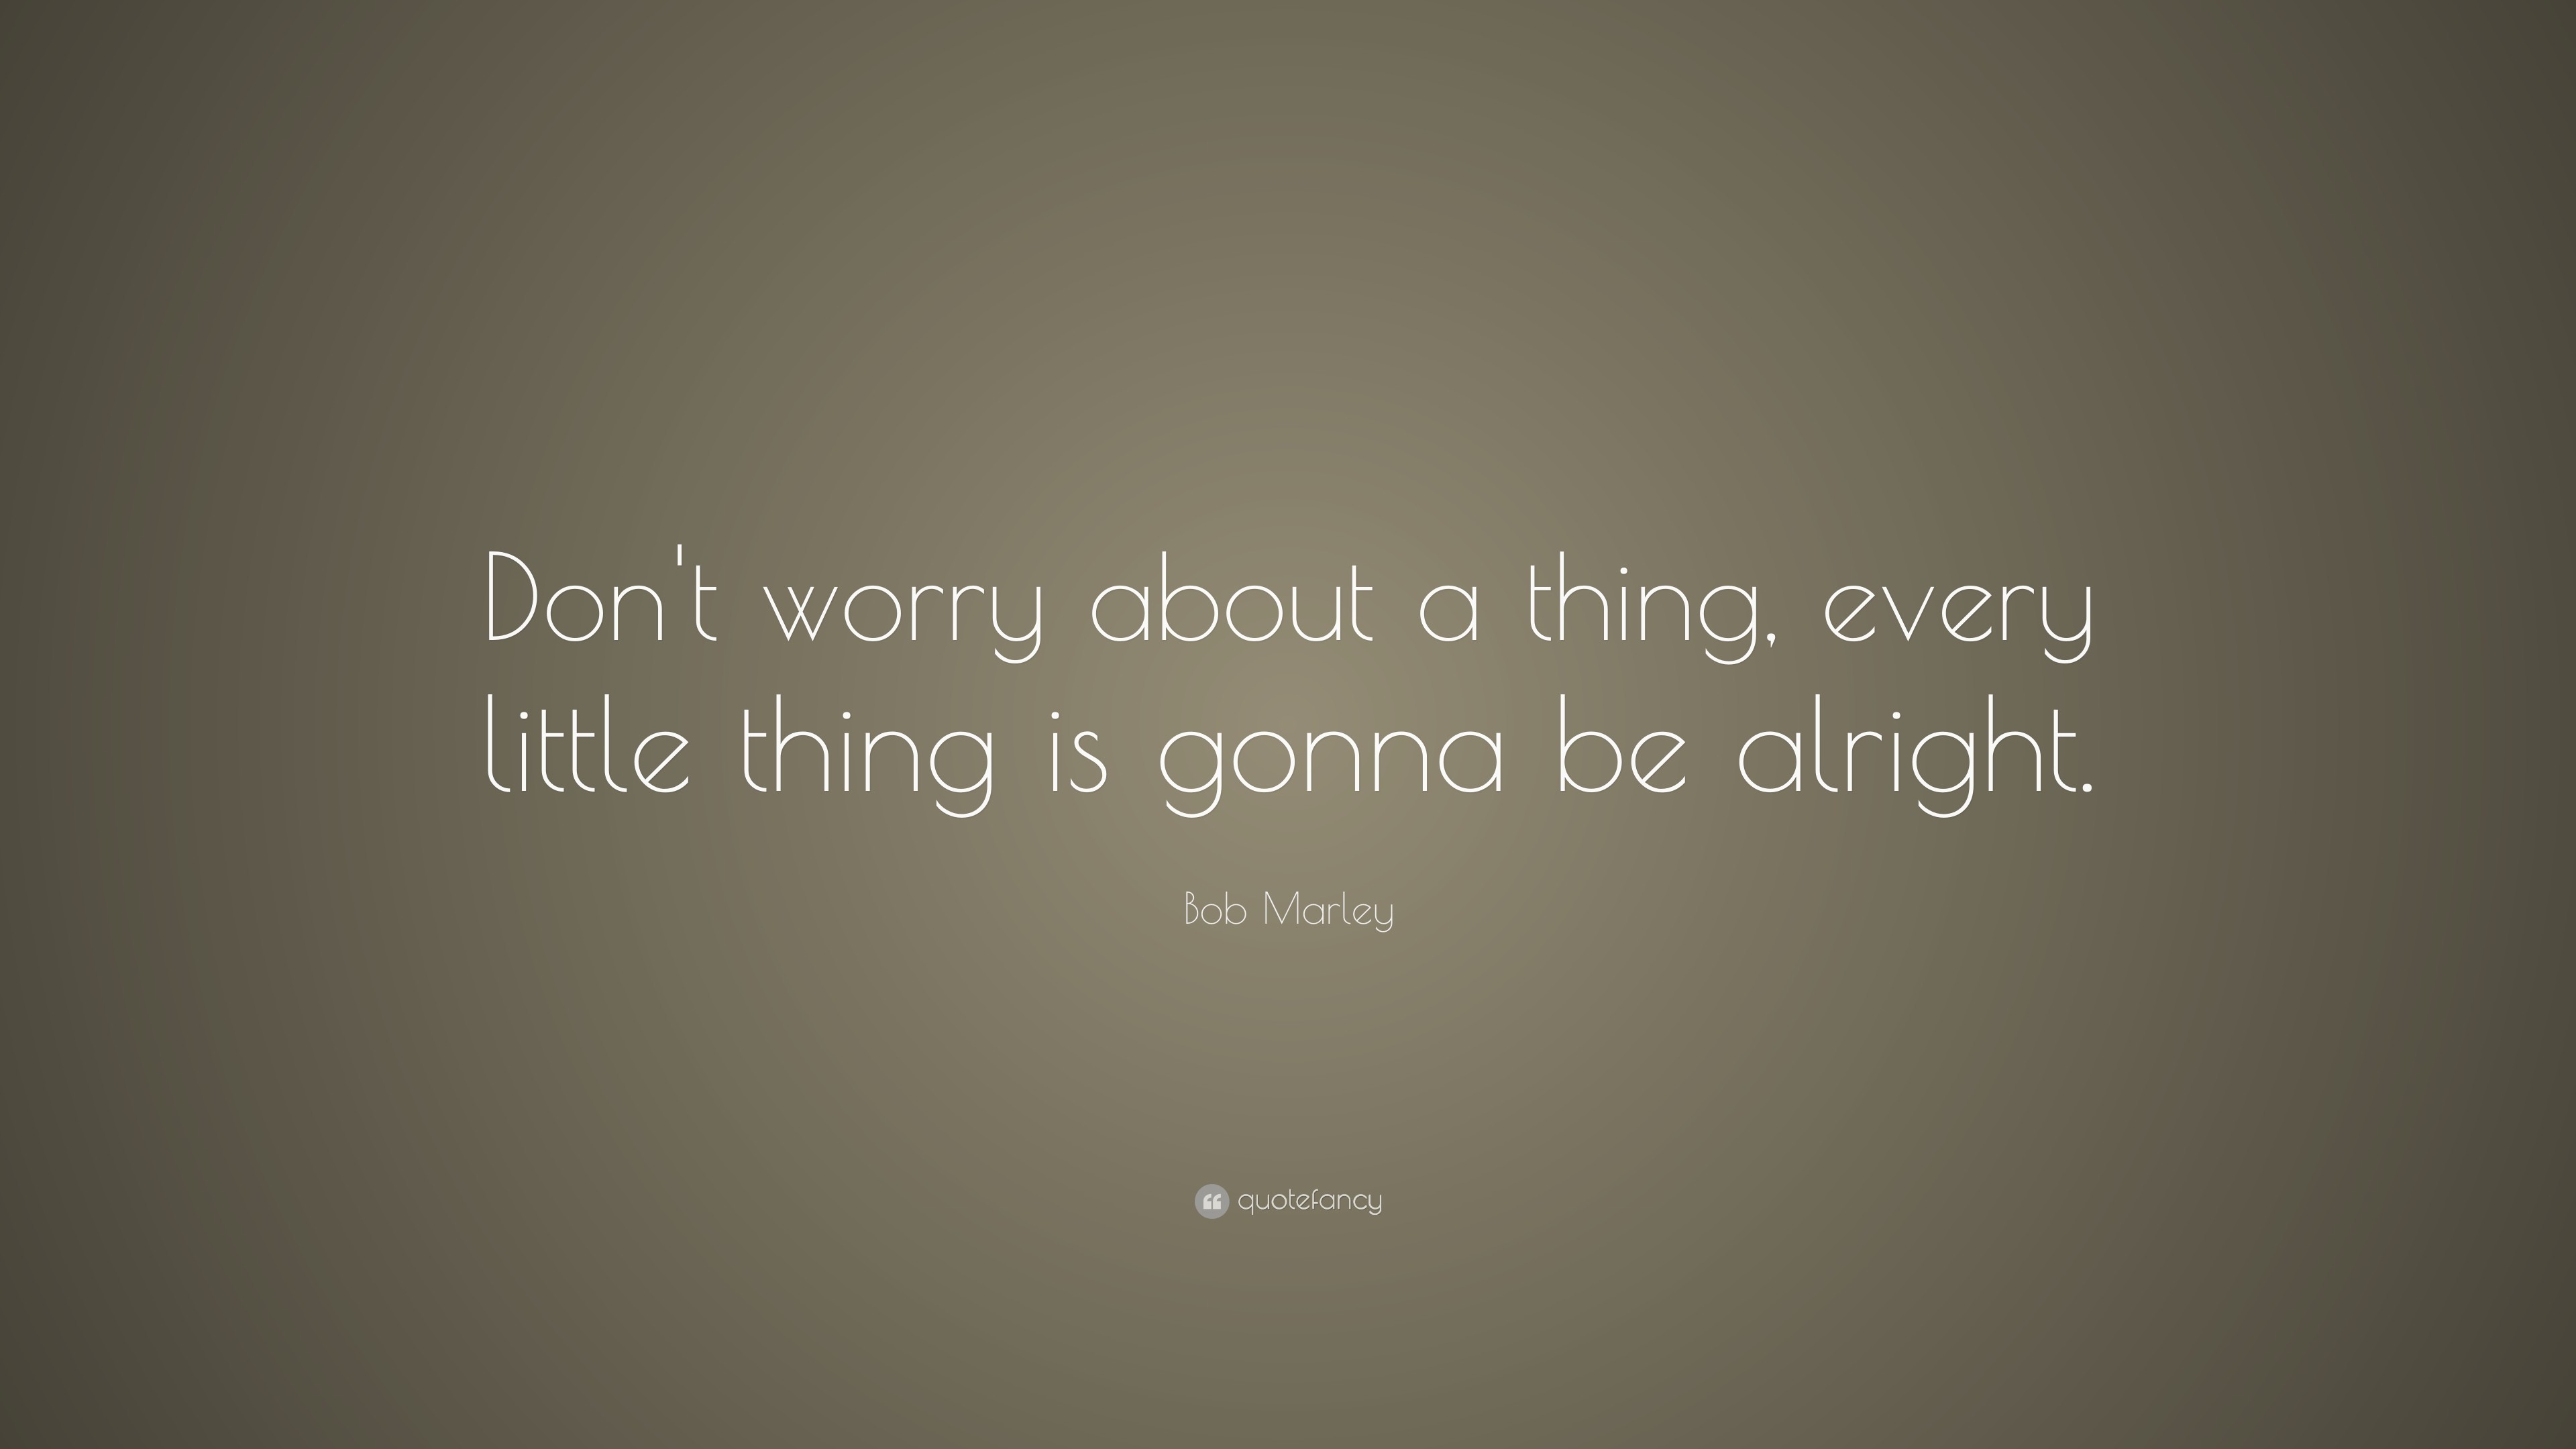 3840x2160 bob marley quotes about worry, Famous bob marley quotes about worry,  Popular bob marley quotes about worry